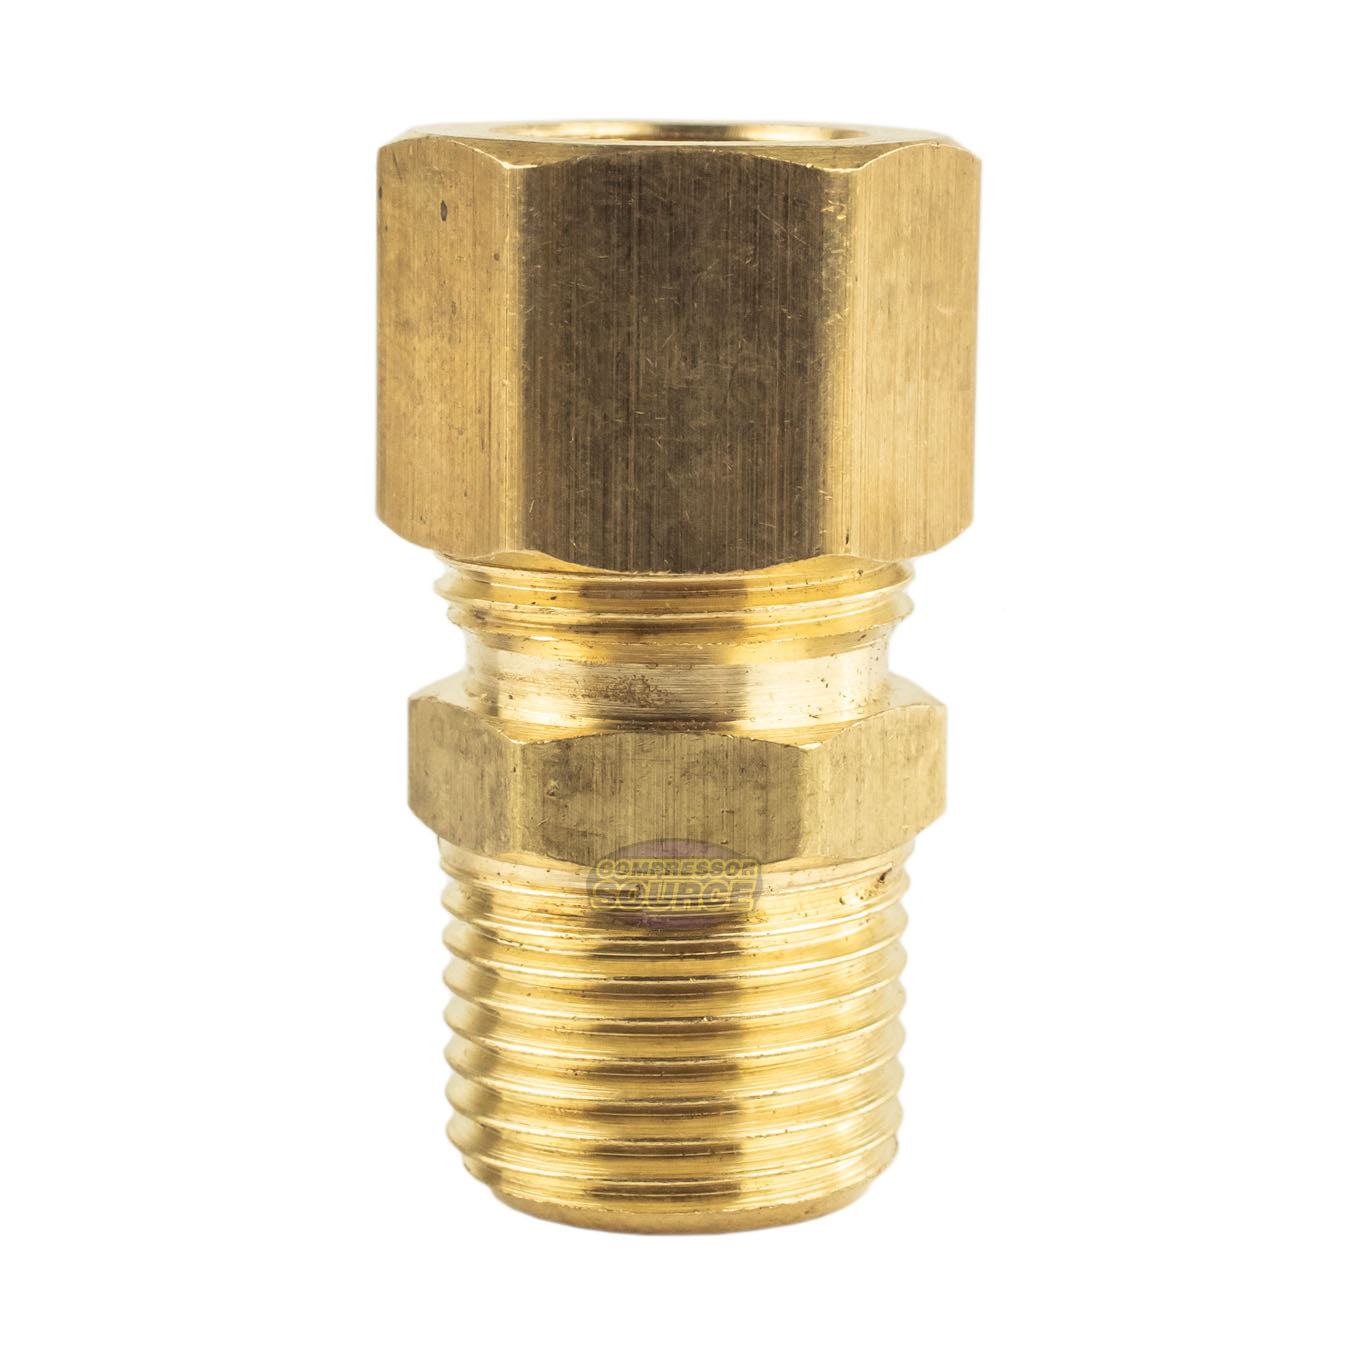 FITTING KIT, 1/8 NPTF COMPRESSION TO 1/8 LINE, BRASS